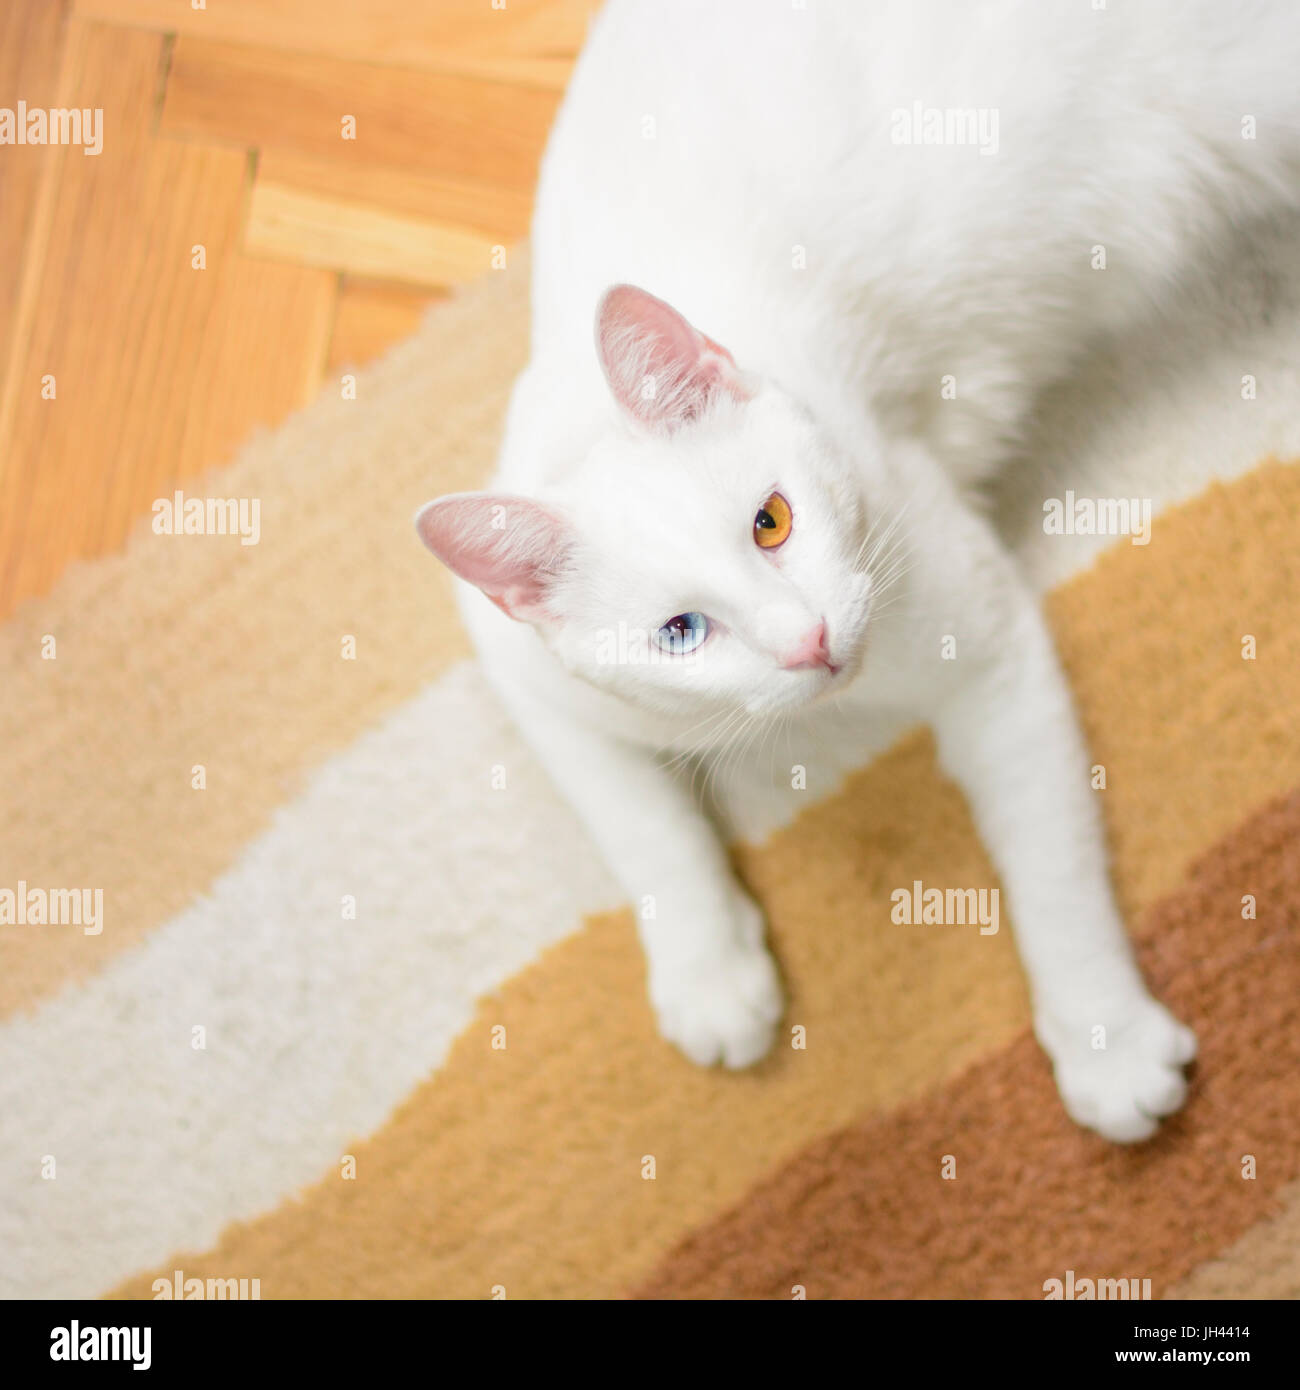 White cat with one blue and one brown eye is lying on the carpet, looking up. Stock Photo